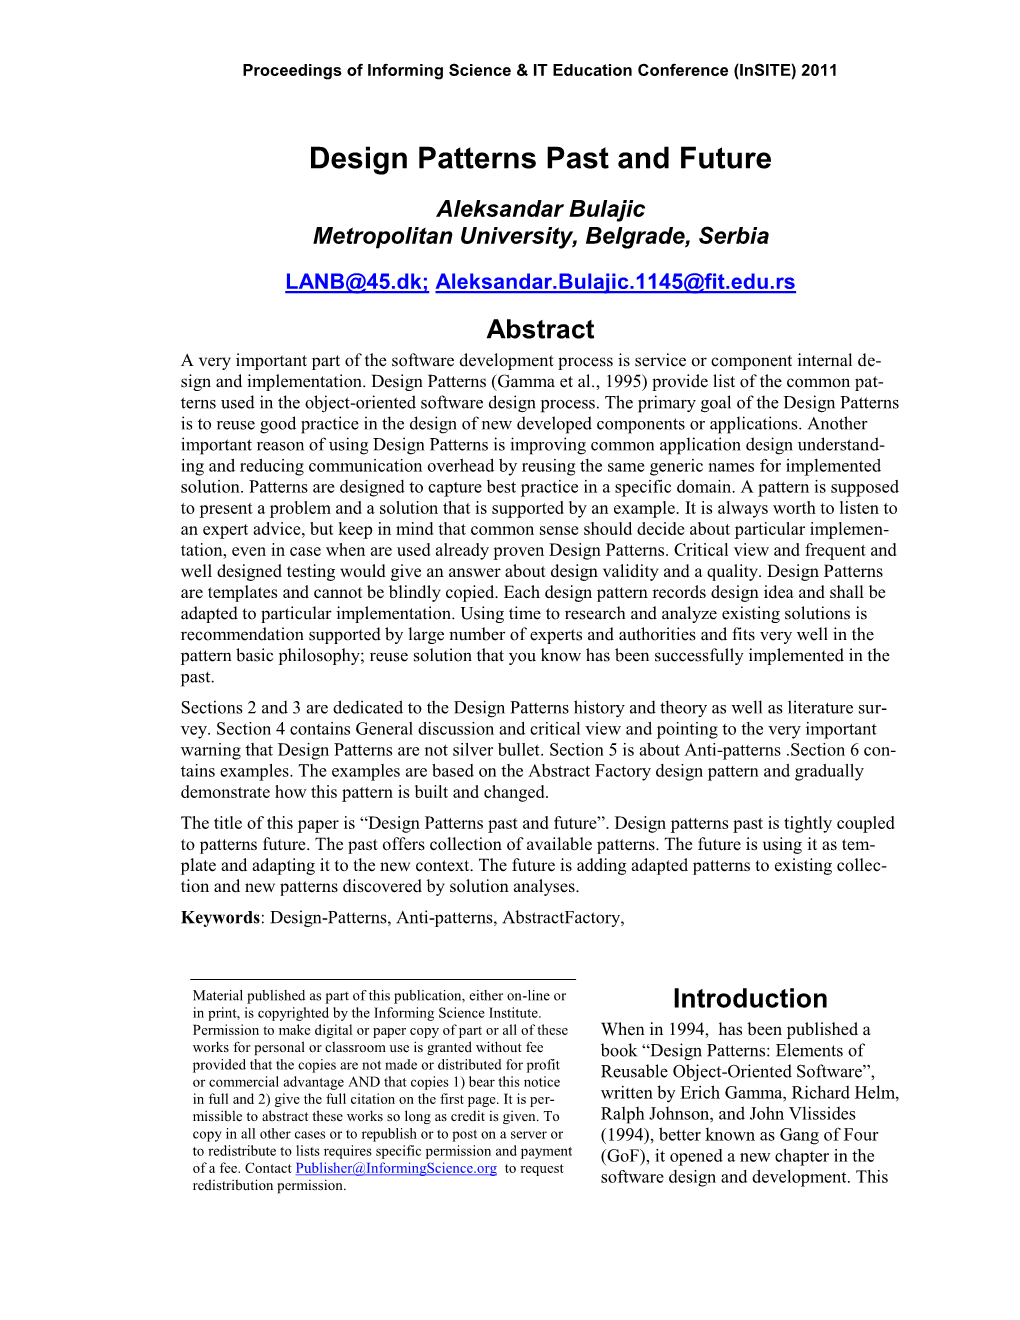 Design Patterns Past and Future